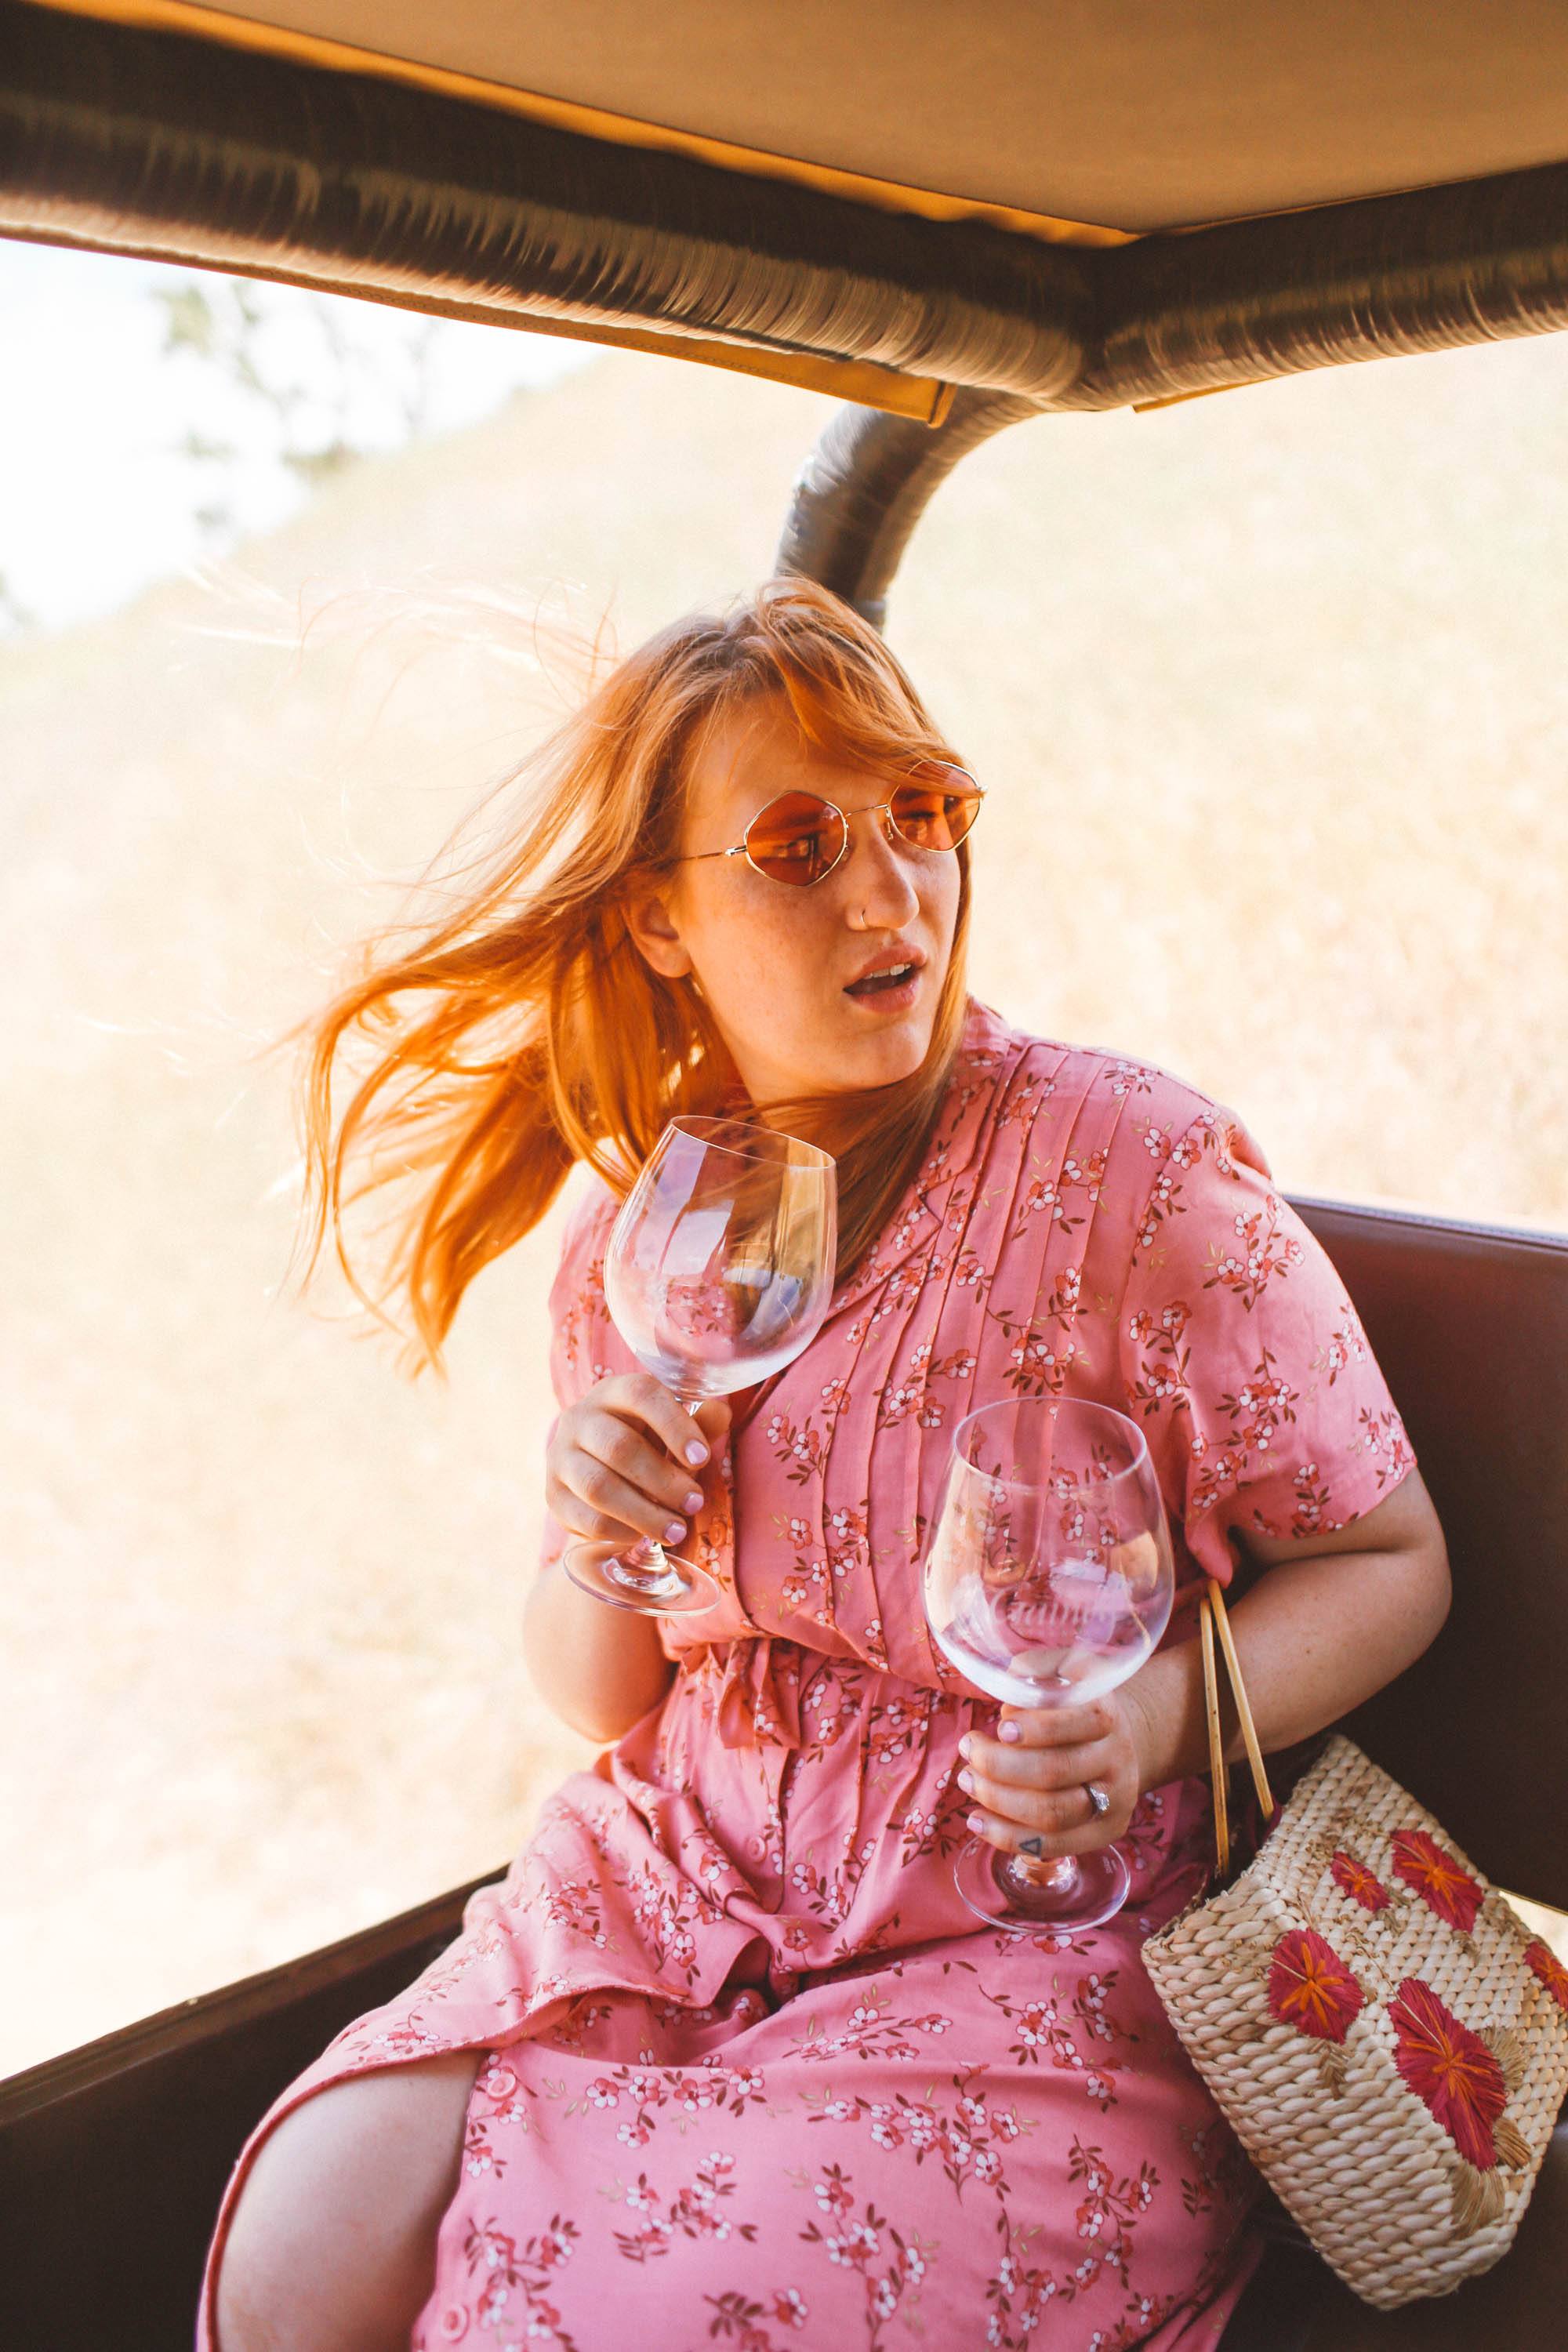 Woman in vintage pink dress holding wine glasses on jeep ride